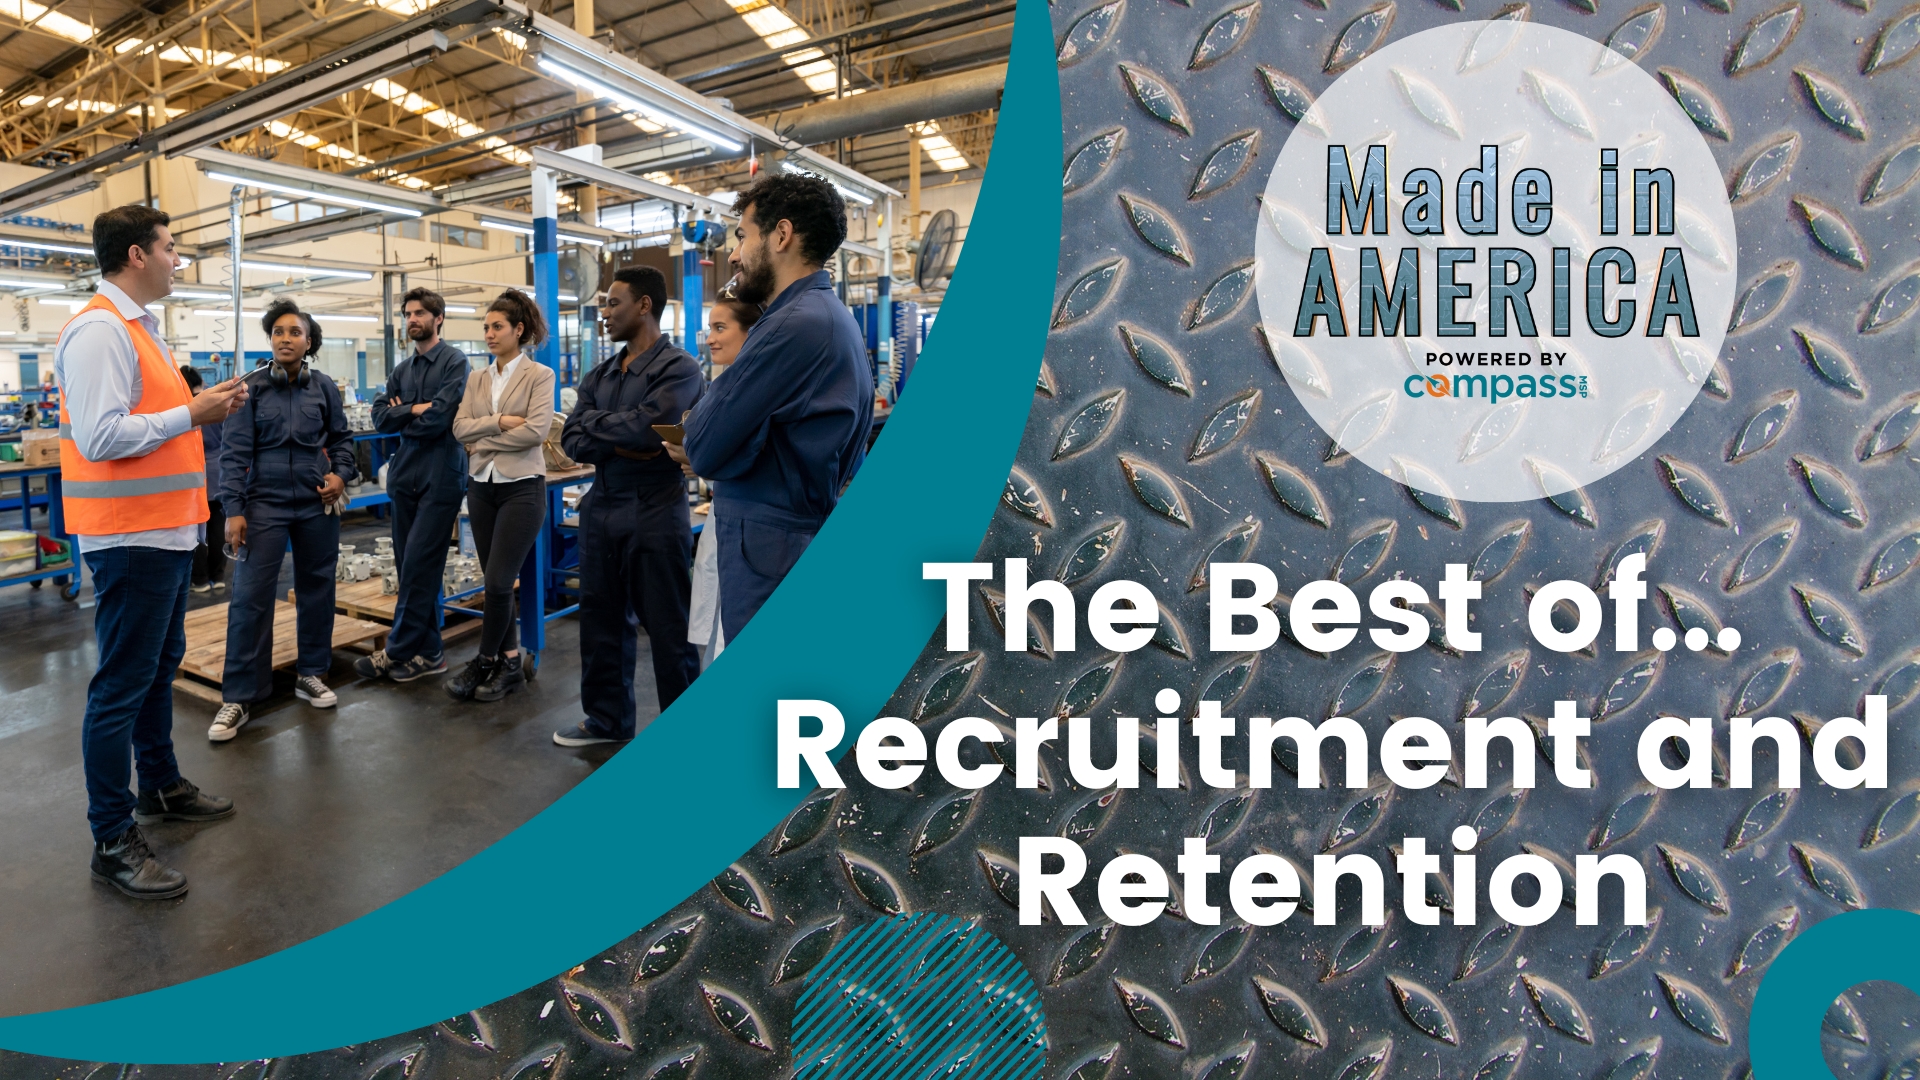 Recruitment and Retention: Best of Made in America